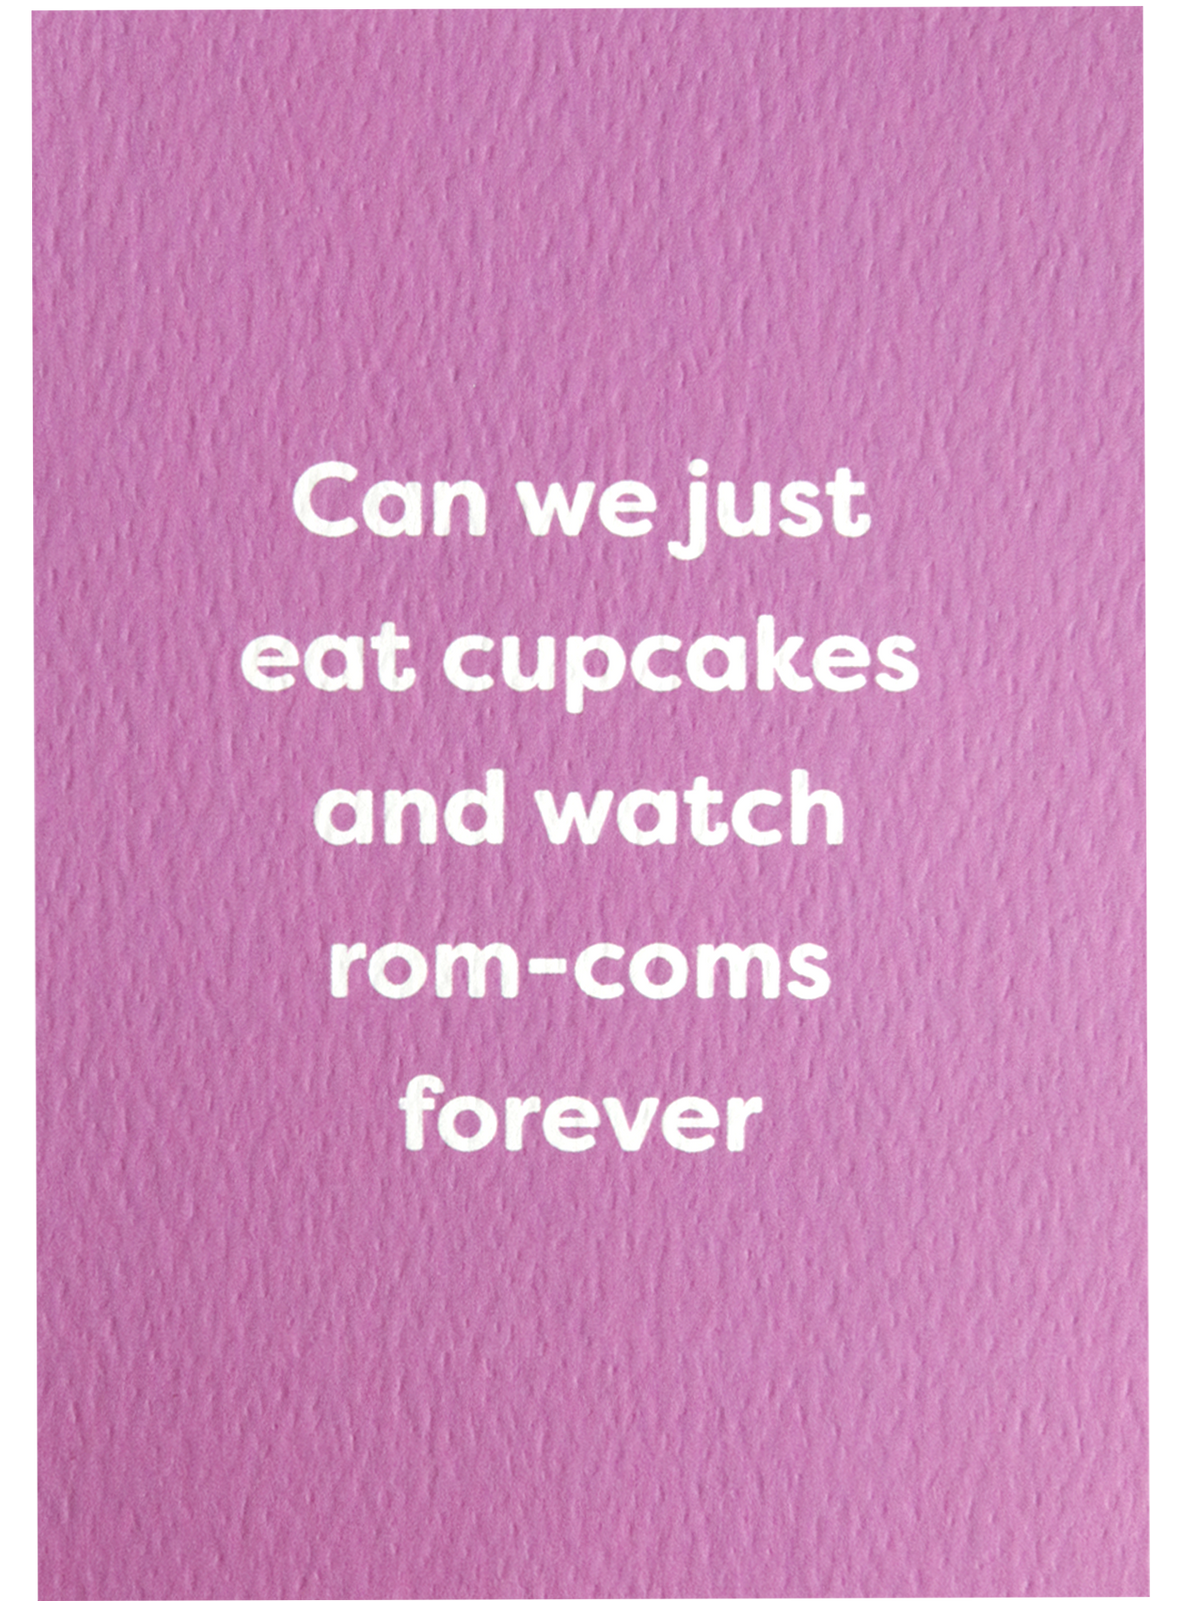 Can We Just Eat Cupcakes & Watch Rom-Coms Forever Pink Valentine's Card